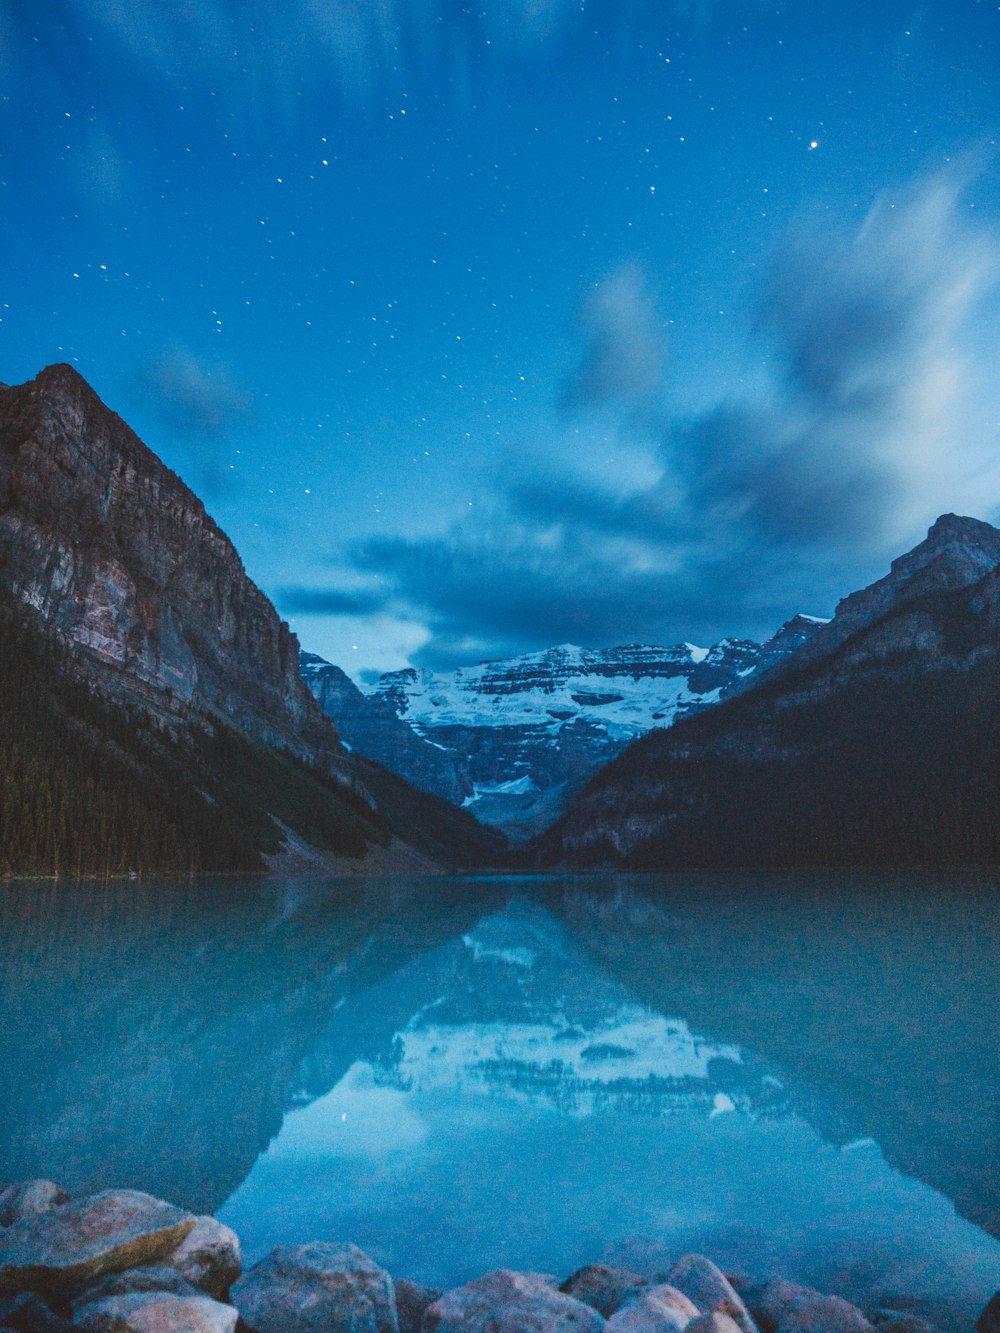 a lake surrounded by mountains under a night sky